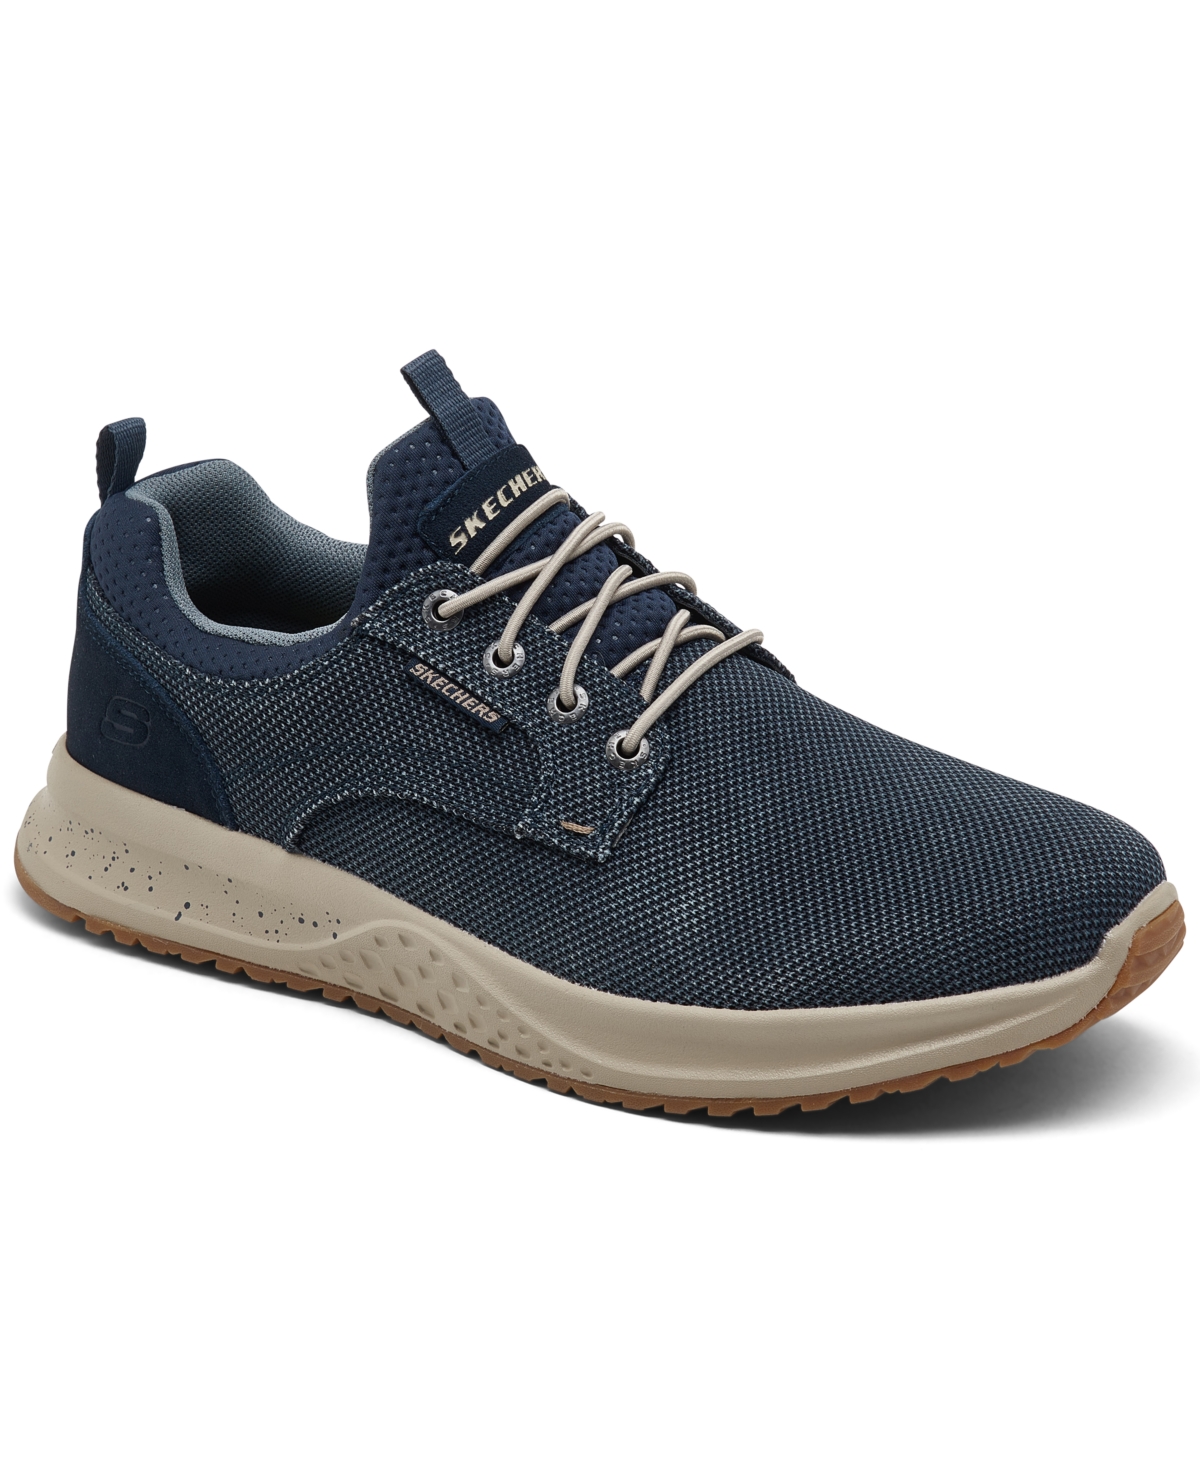 Men's Relaxed Fit: Fletch - Oxley Memory Foam Casual Sneakers from Finish Line - Blu-blue